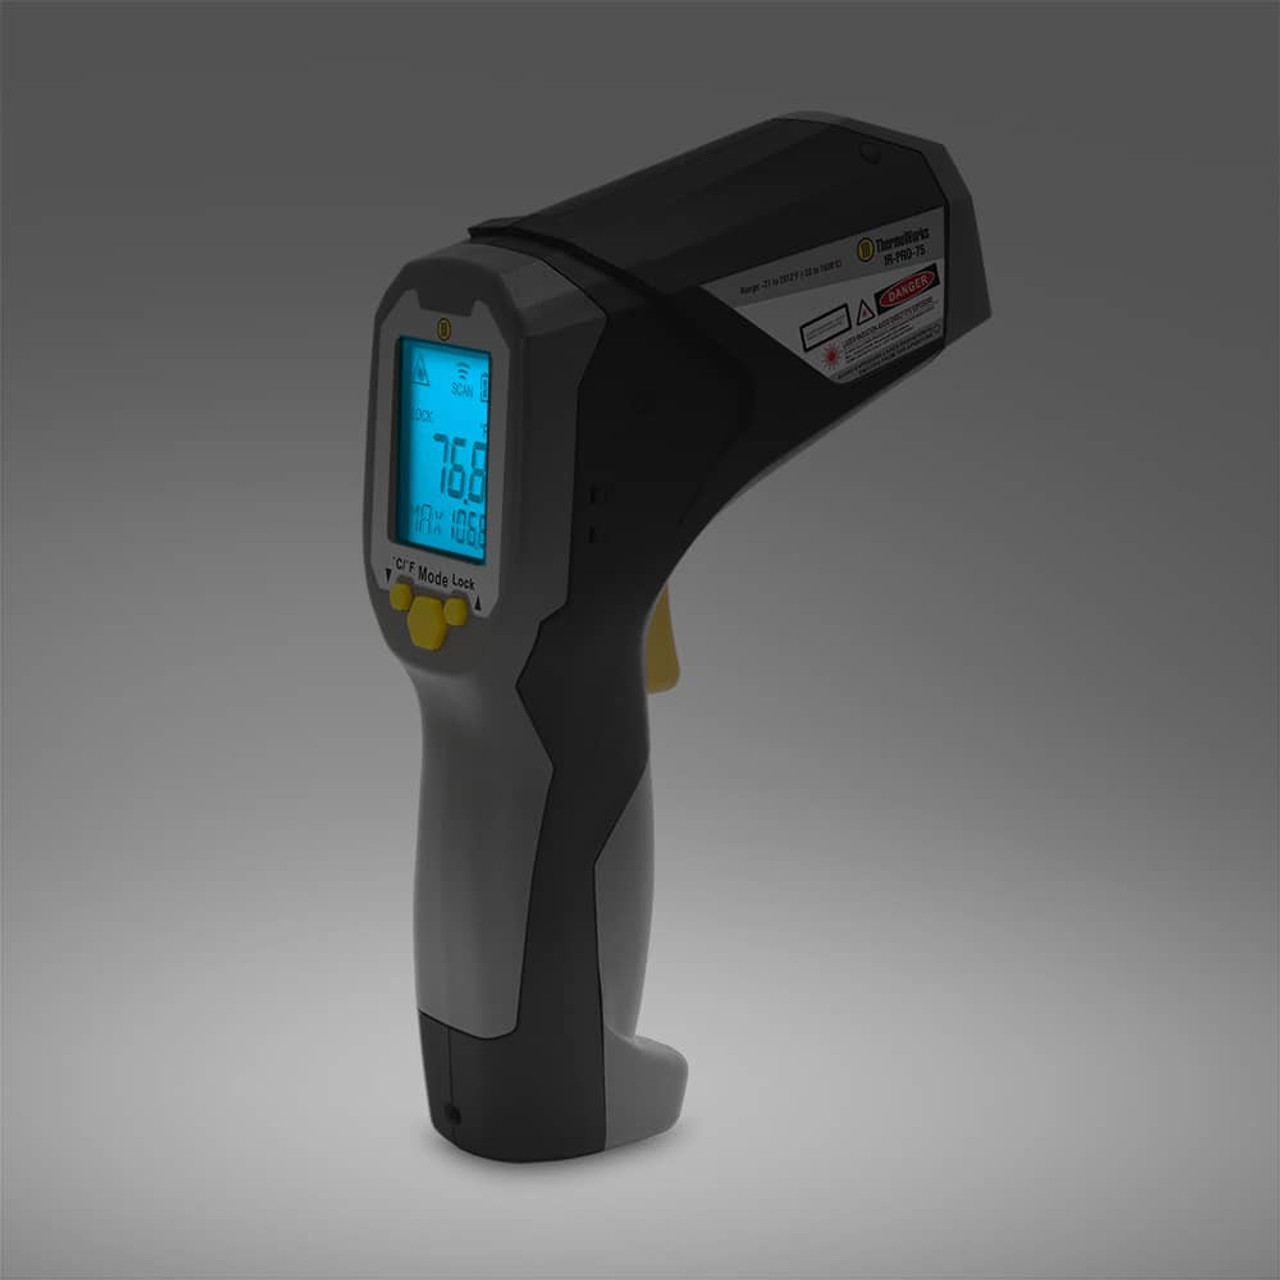 ThermoWorks  IR-Pro - Professional Infrared Thermometer